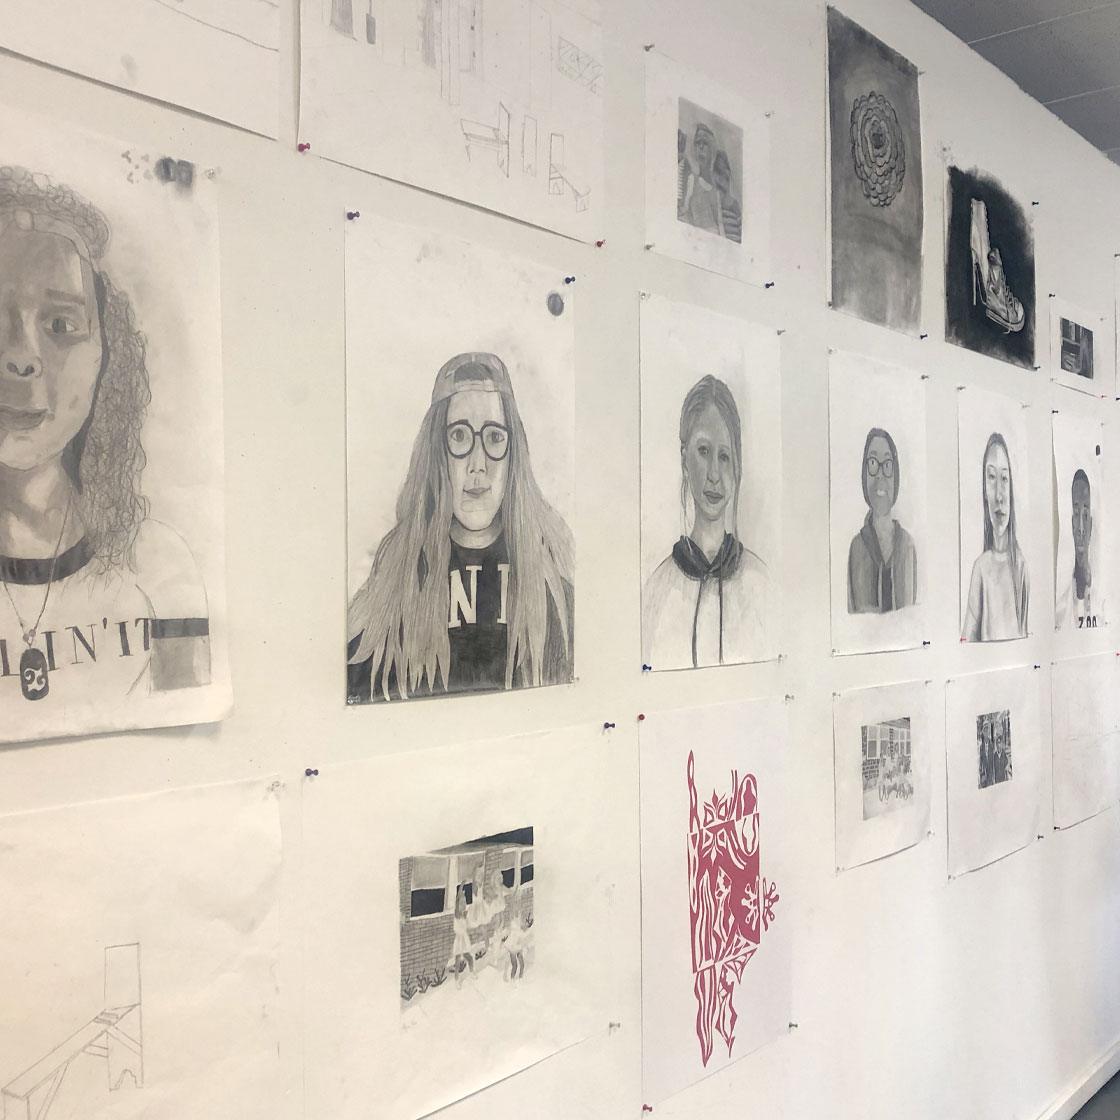 A wall displaying charcoal portrait drawings.